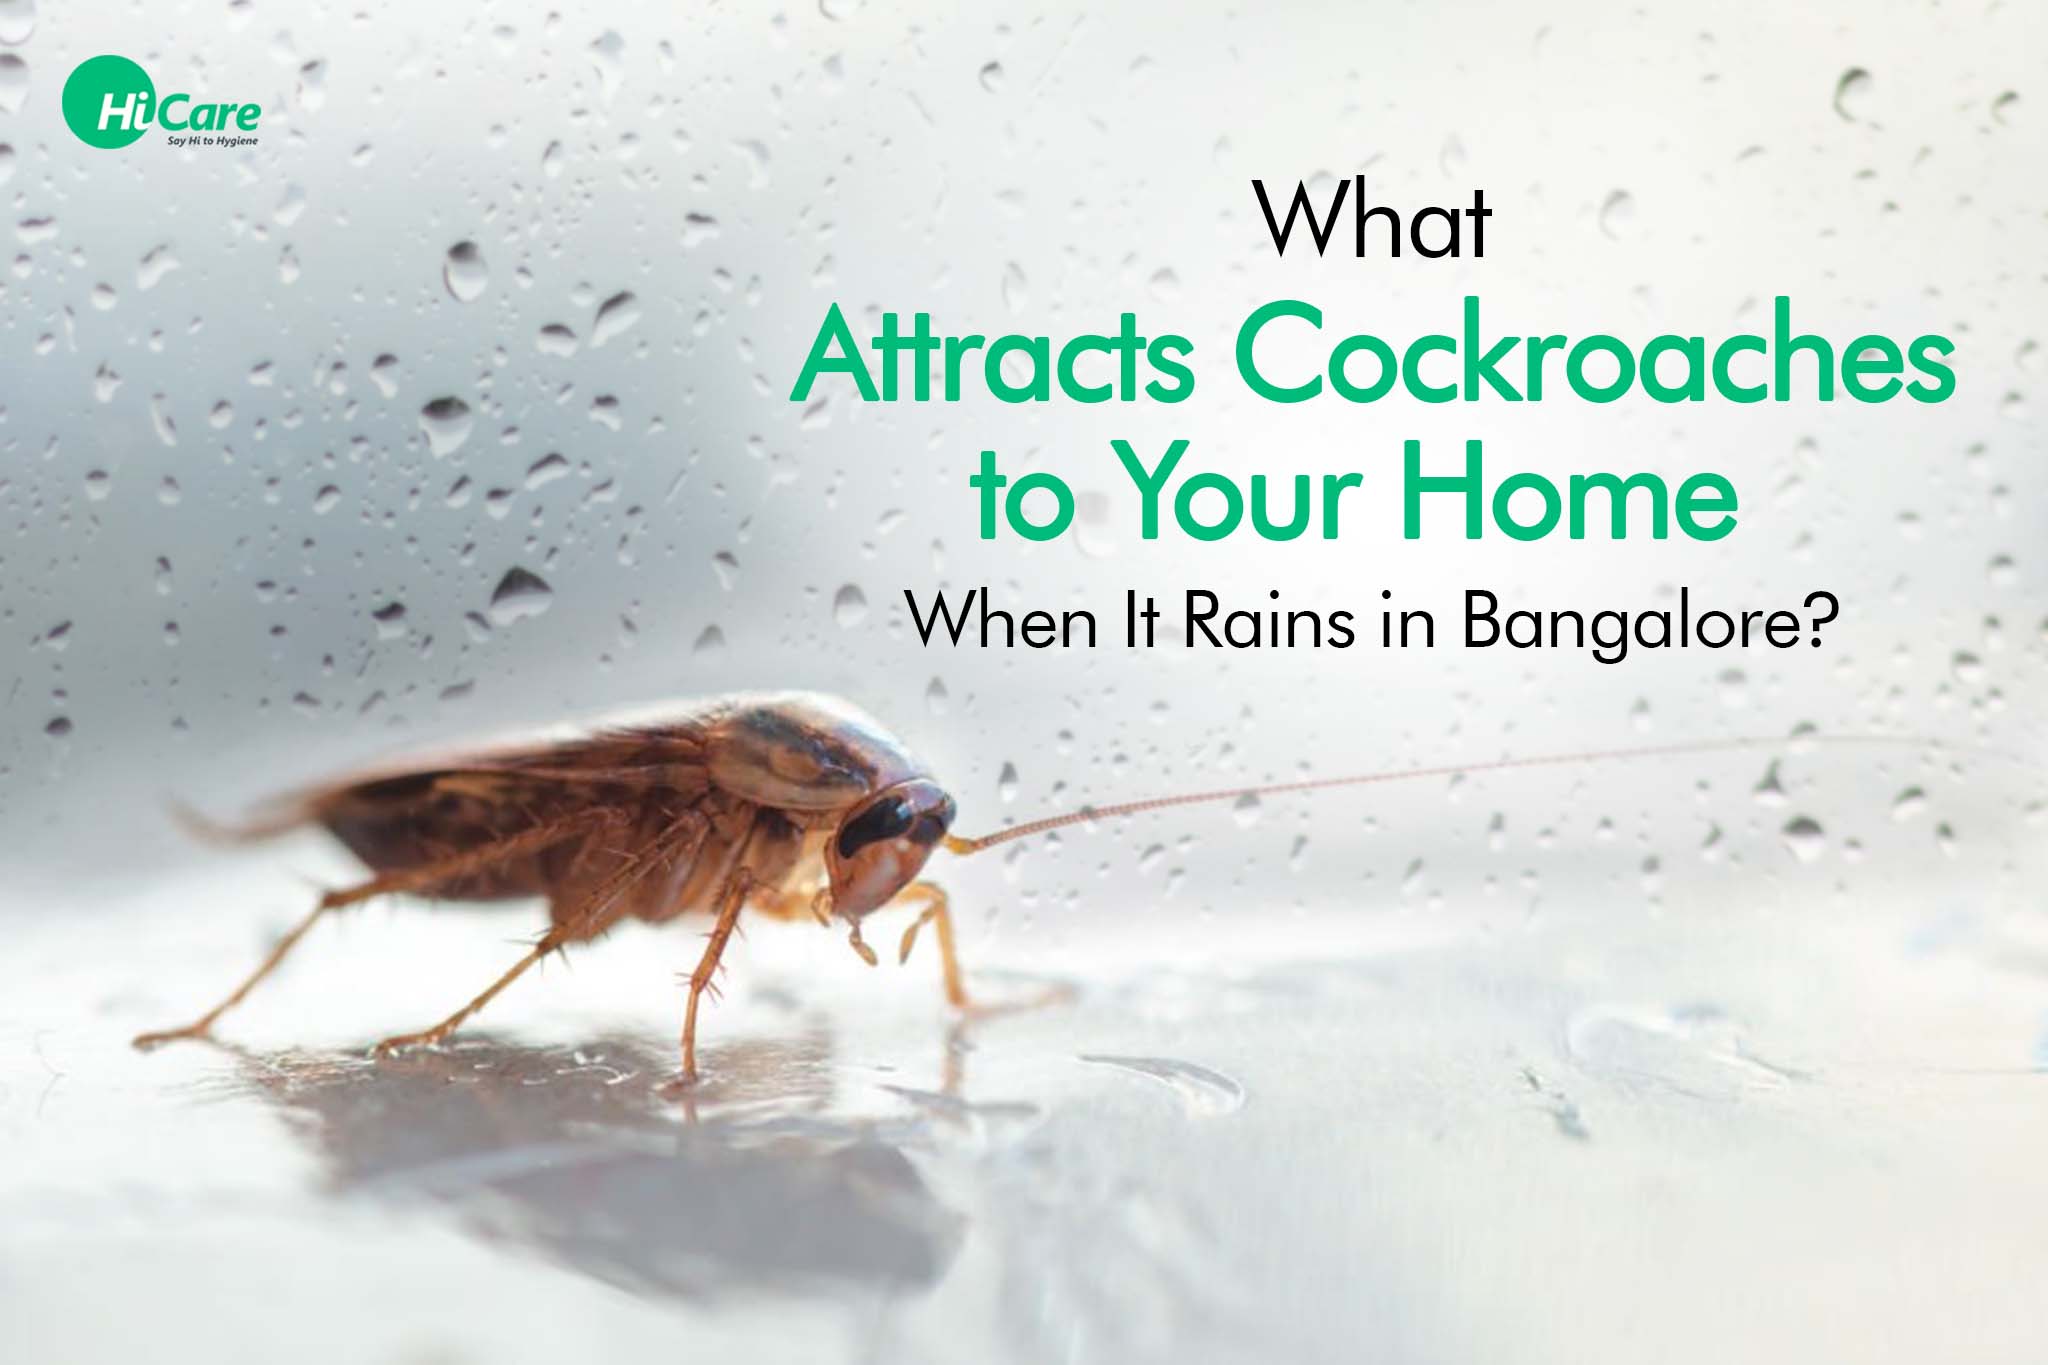 What Attracts Cockroaches to Your Home When It Rains in Bangalore?